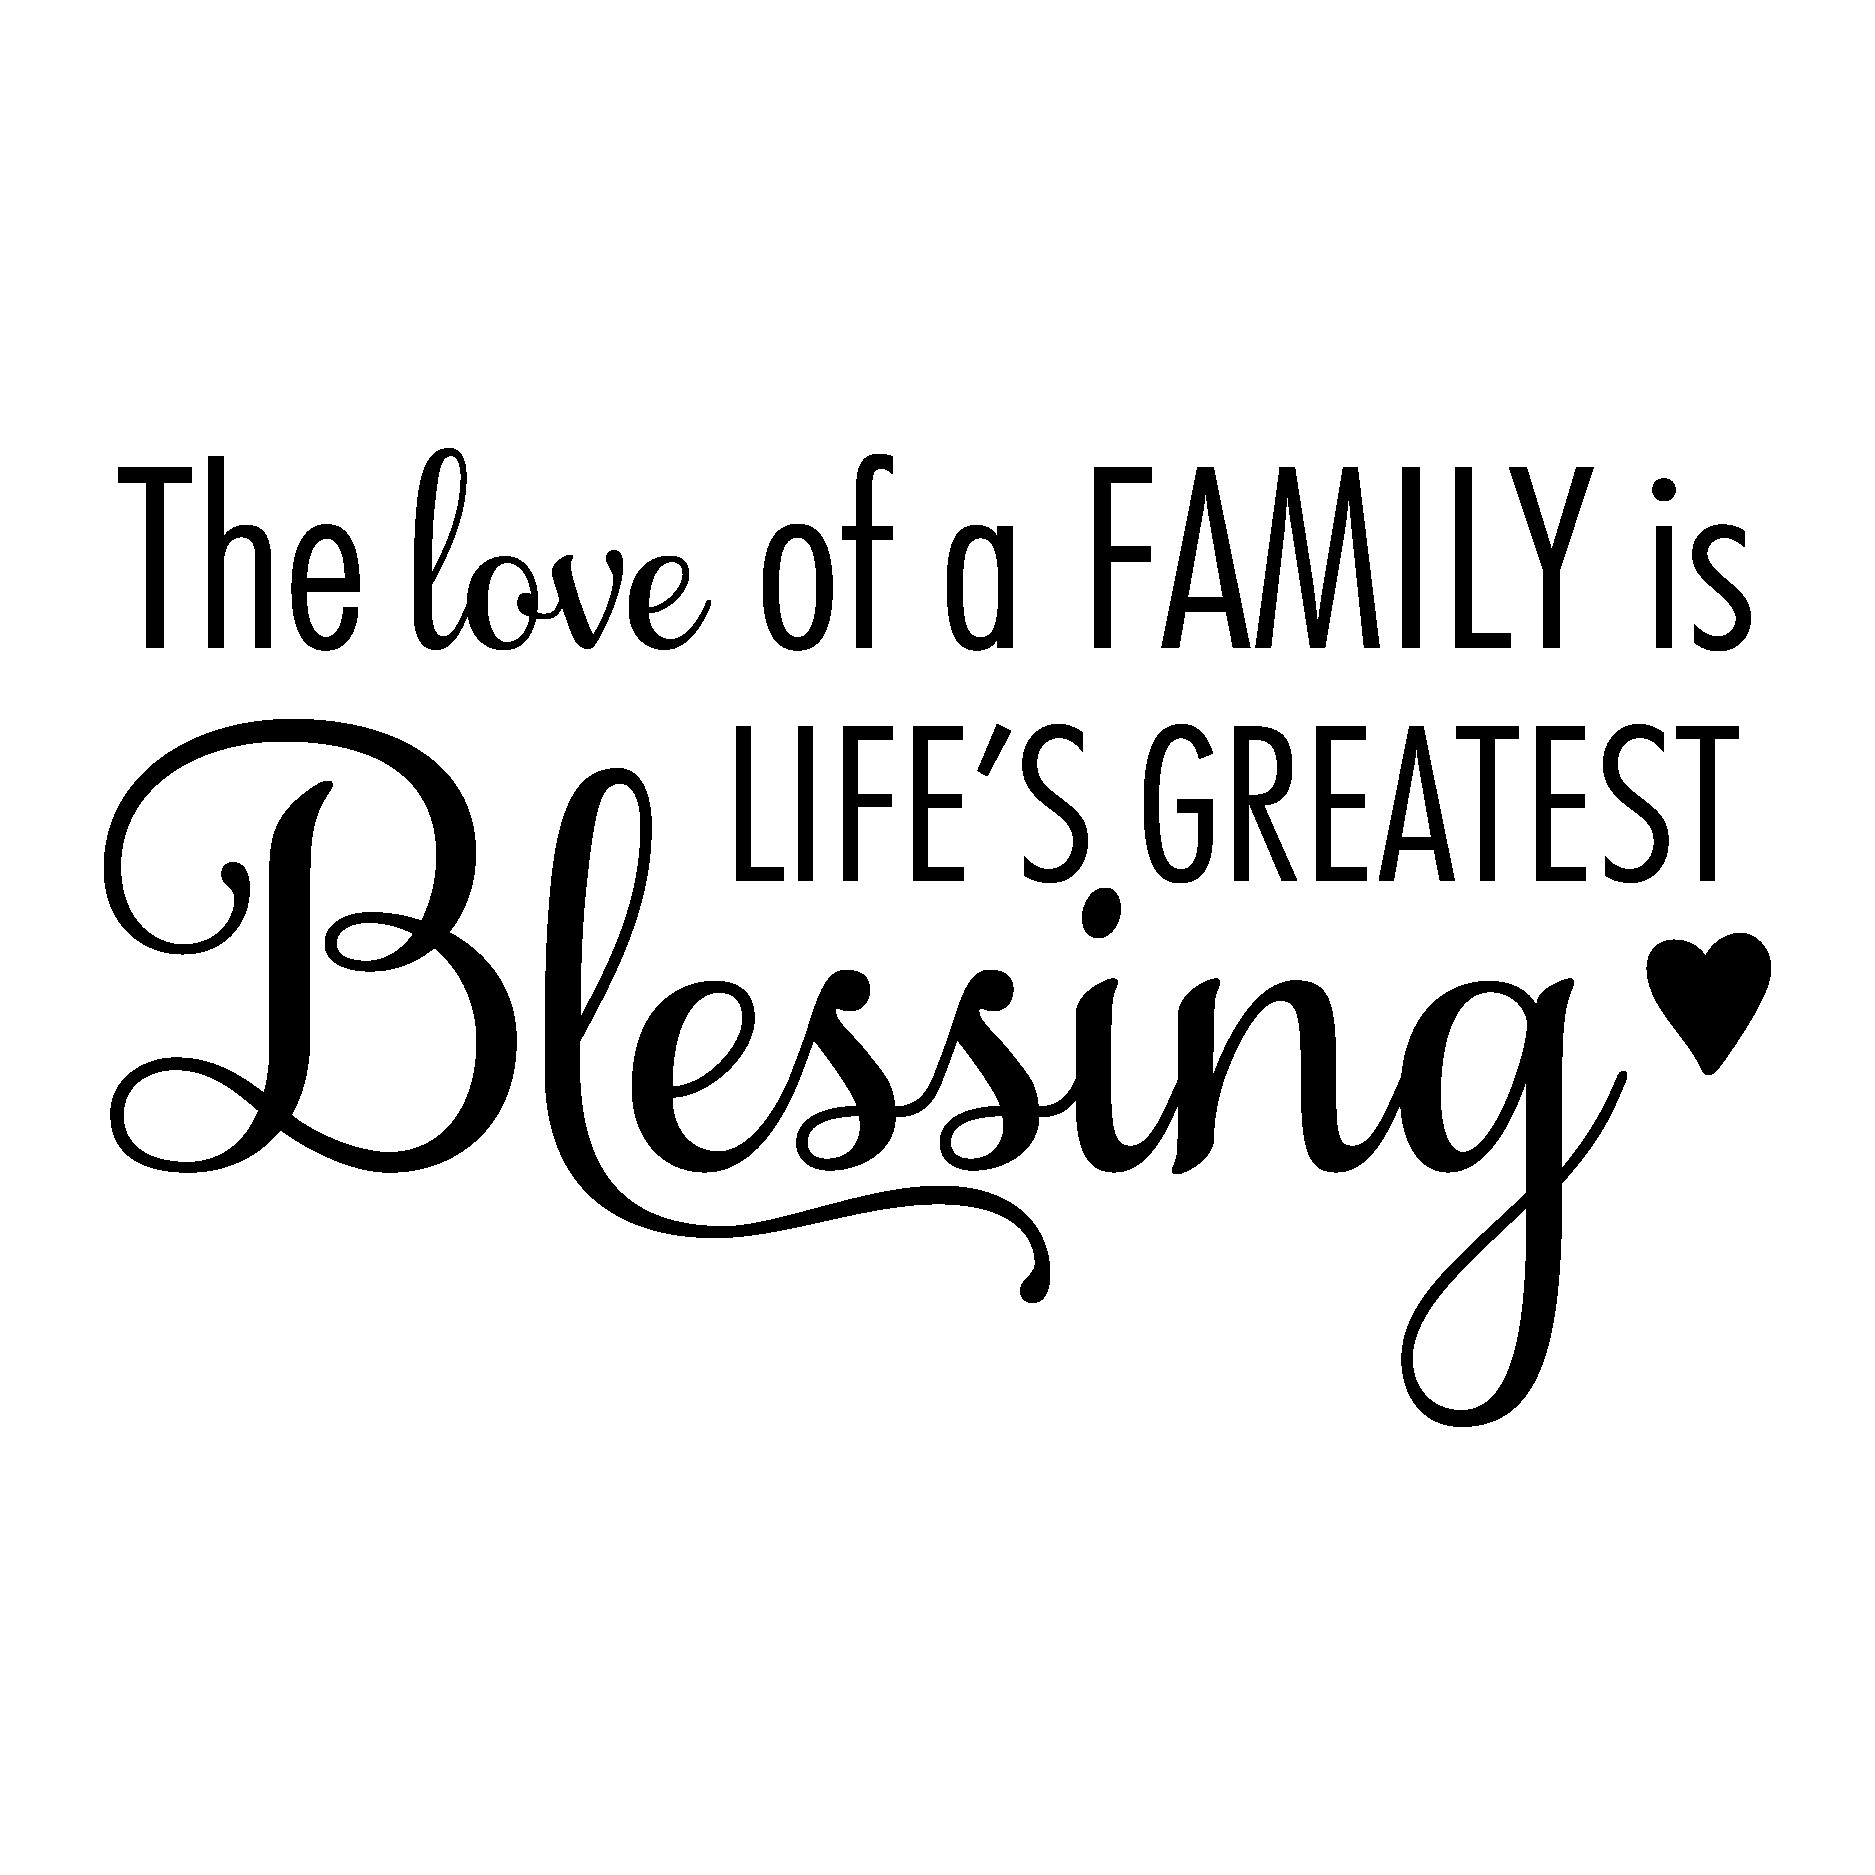 Family And Love Quotes
 The Love of A Family Wall Quotes™ Decal